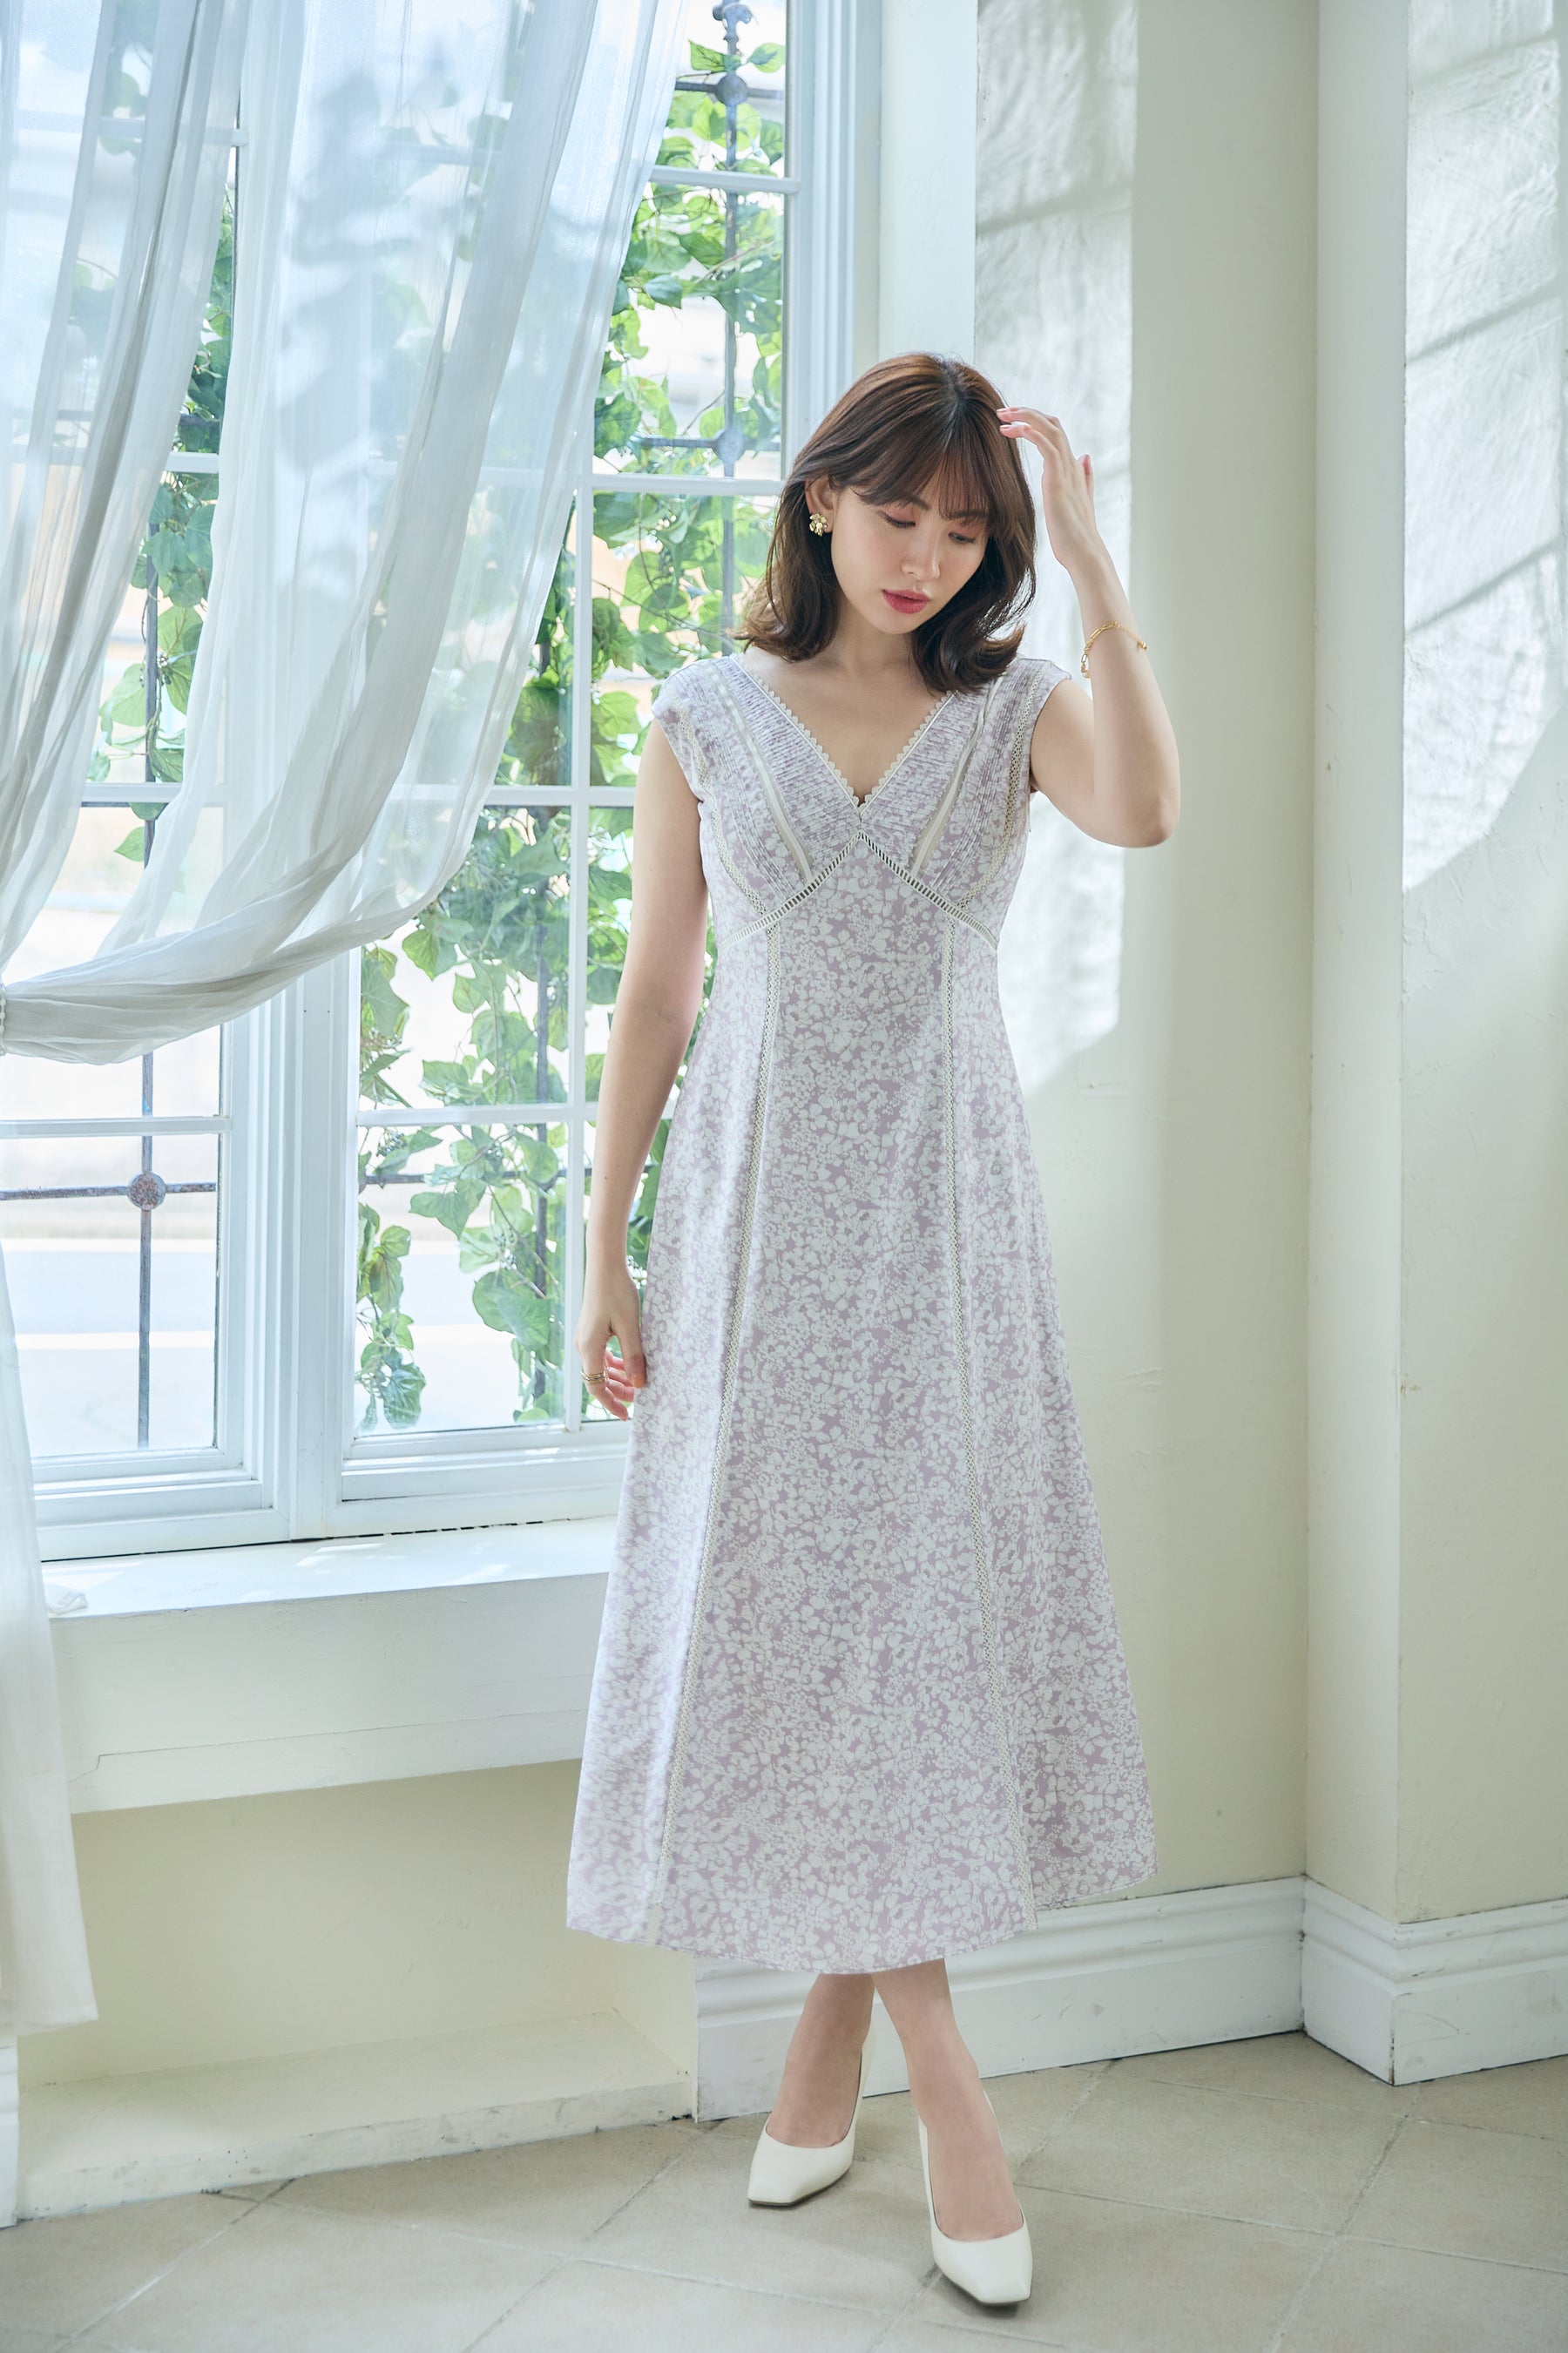 herlipto Lace Trimmed Floral Dressカラーブルー